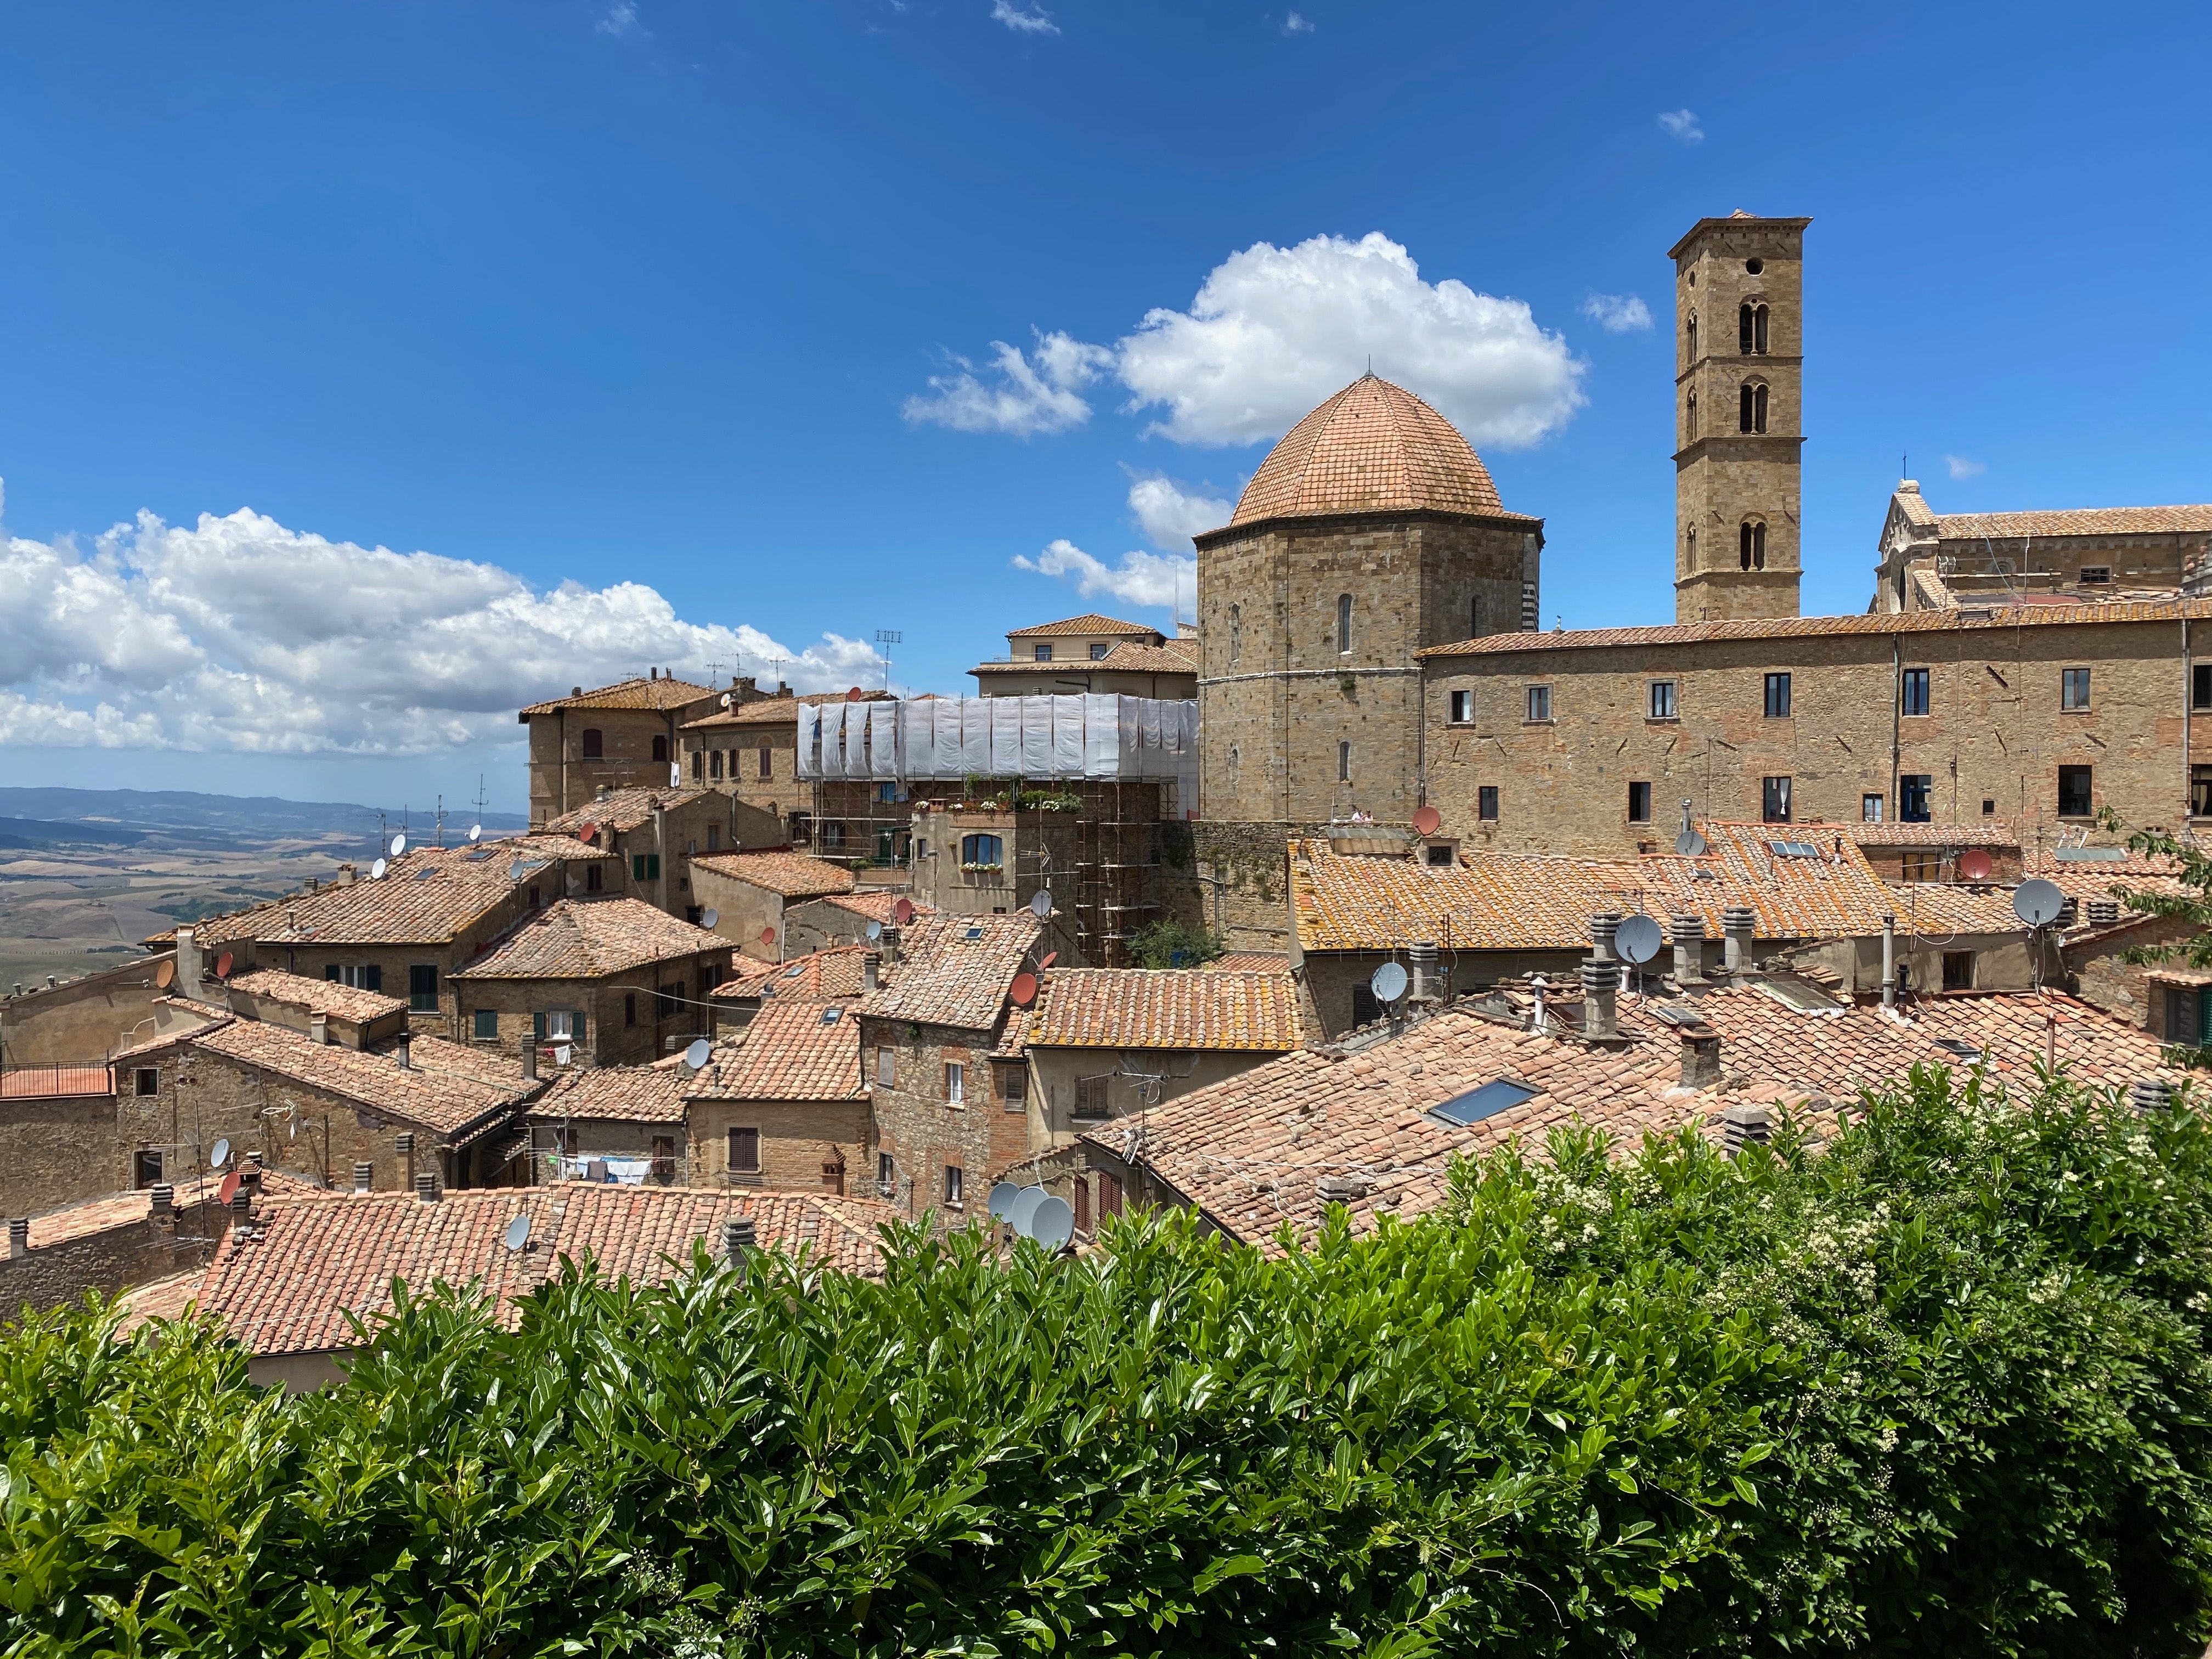 Cover Image for Top 11 Things to Do in Volterra: Explore the Best of Tuscany's Historic Hill Town